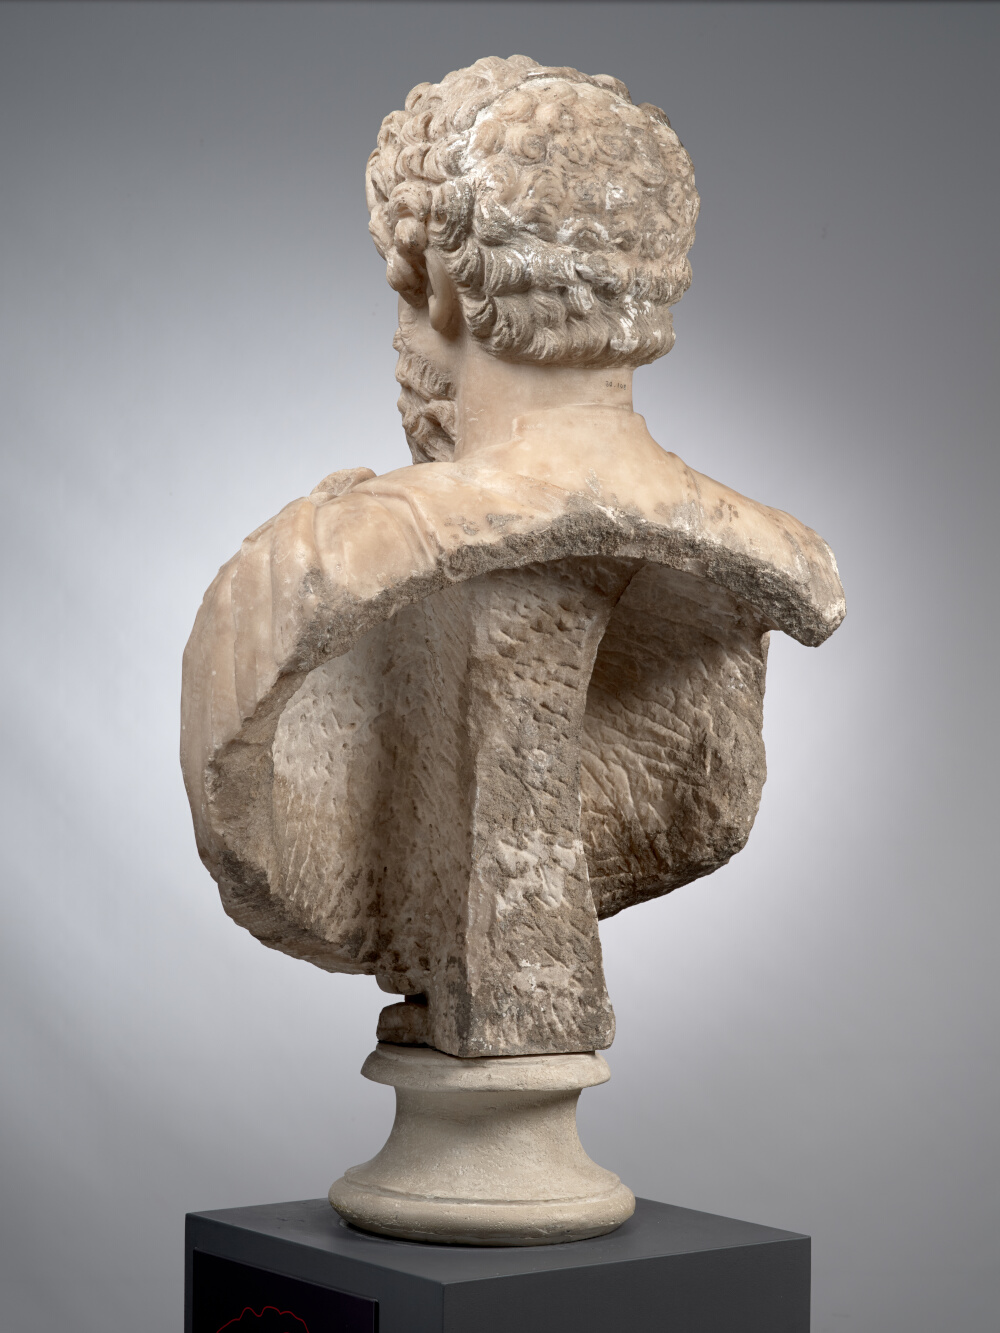 Bust of Marcus Aurelius, older and wearing a cuirass